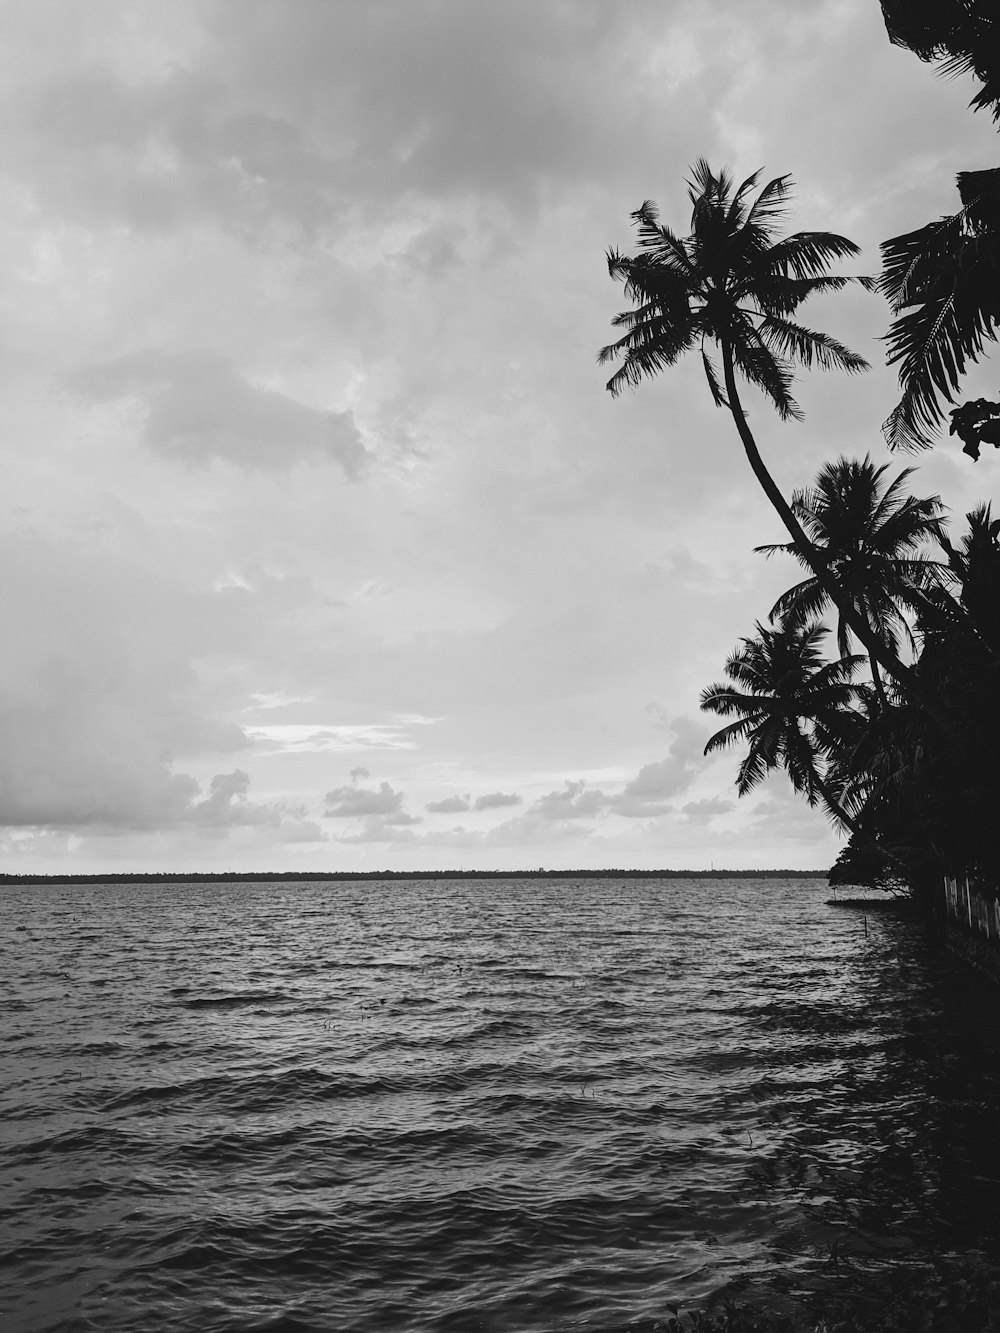 grayscale photography of trees near body of water